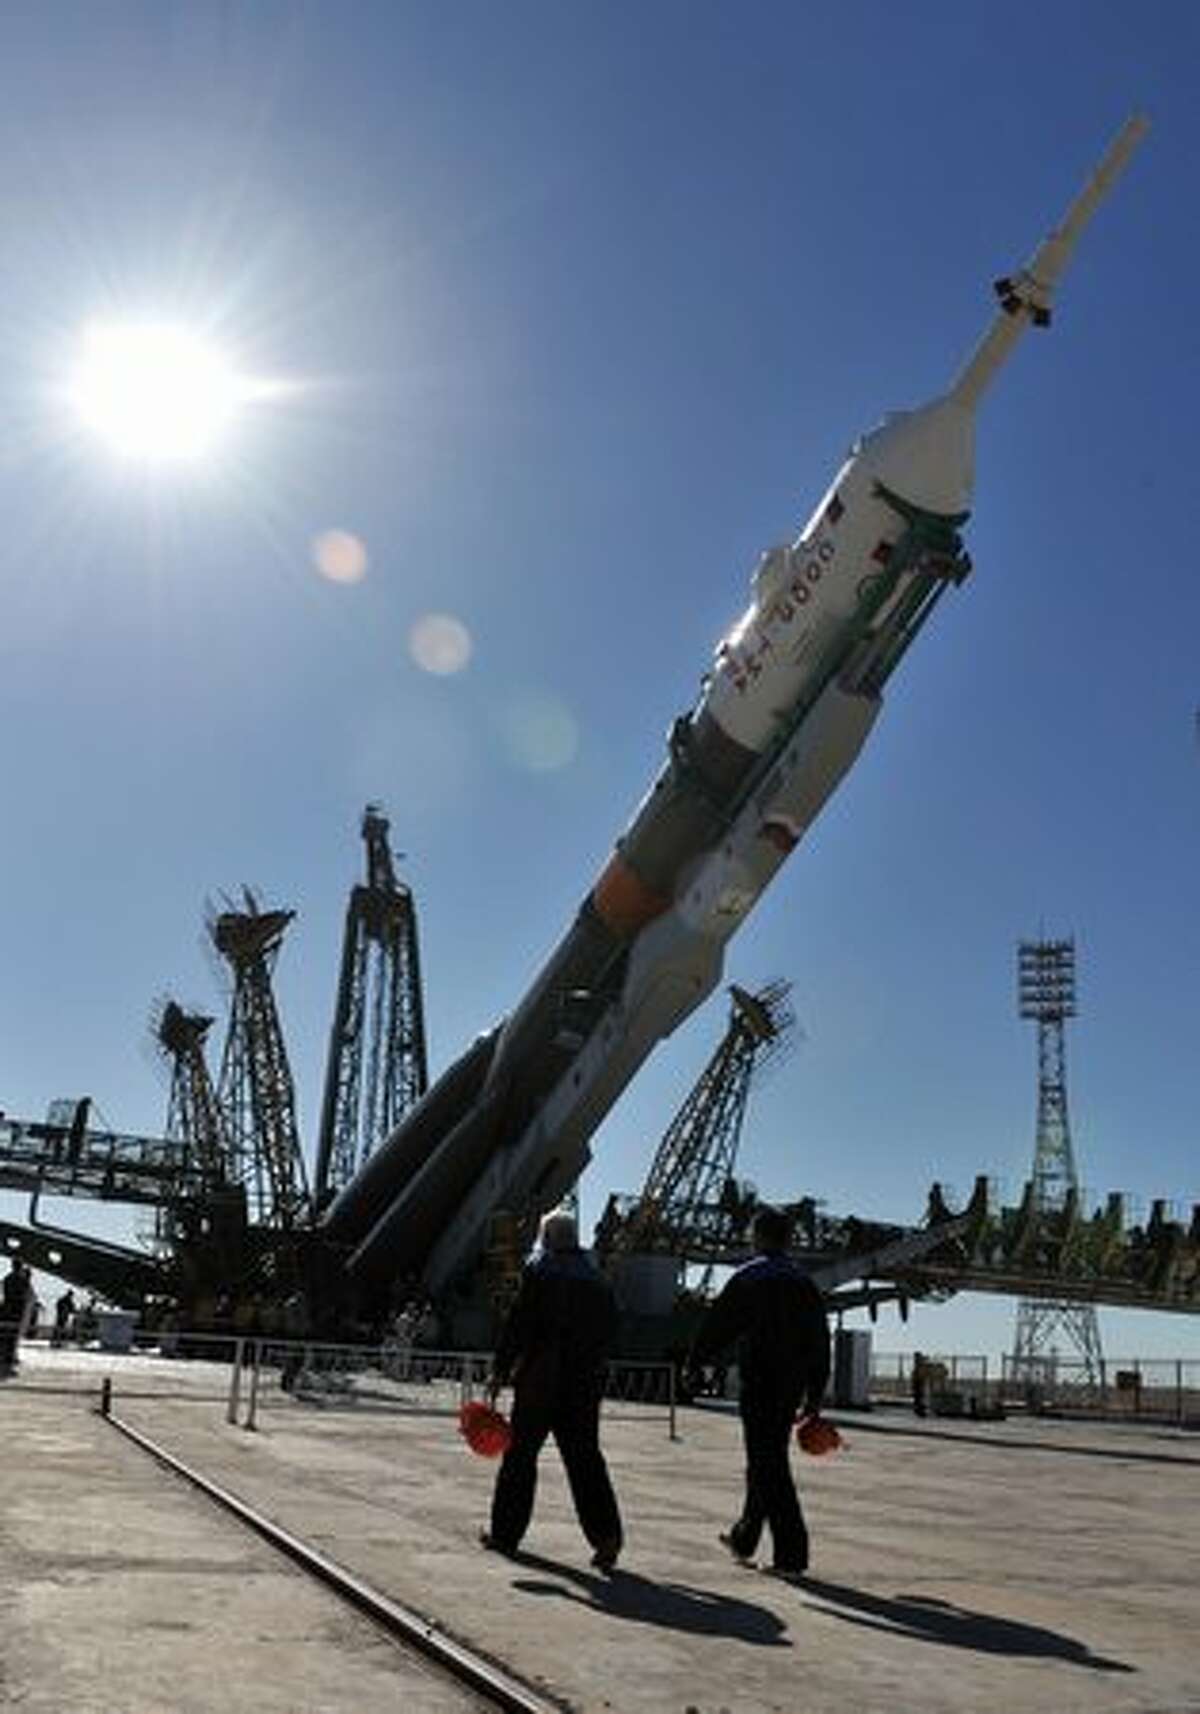 Russian Soyuz TMA-19 spacecraft is installed on its launch pad at the Baikonur Cosmodrome in Kazakhstan.